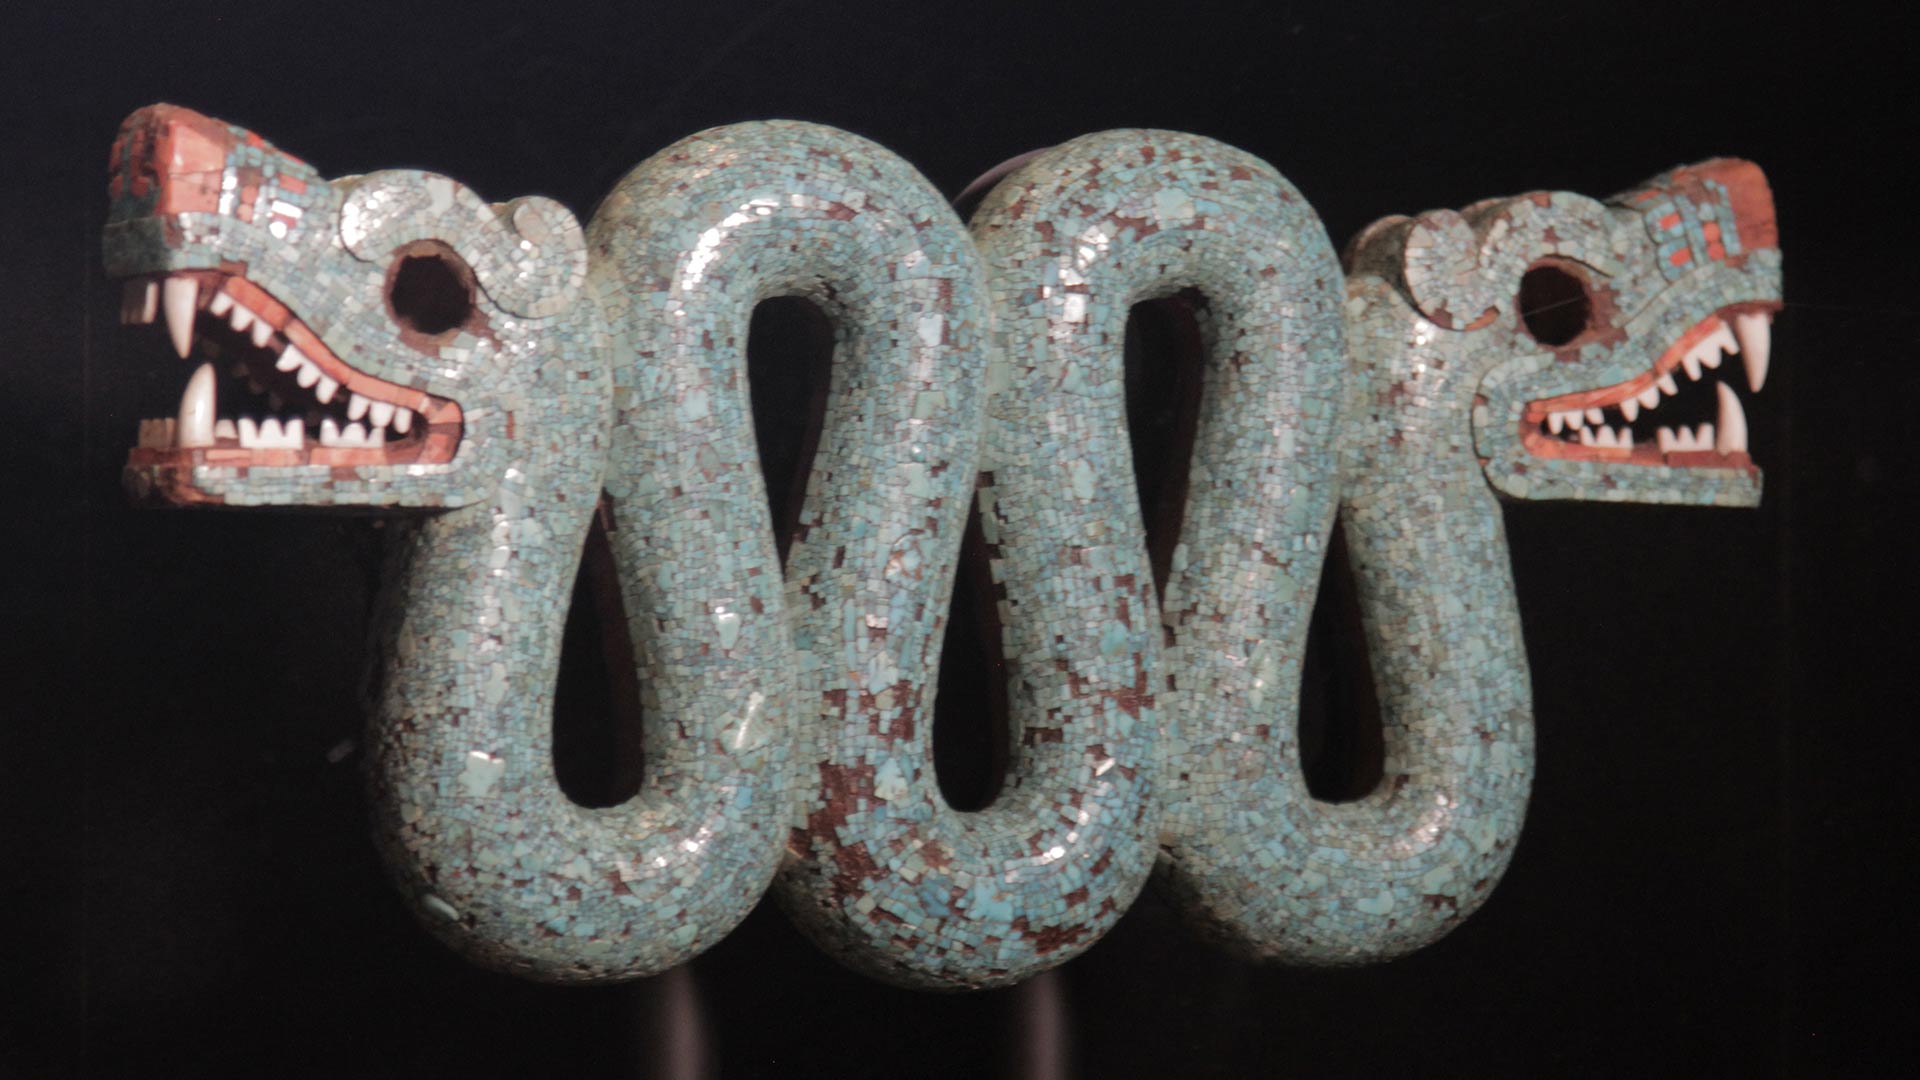 Turquiose mosaic of double headed serpent, Aztec. Commissioned by Mactezuma II as a gift for Hernán Cortés (c. 1400 – 1521) – British Museum, London.